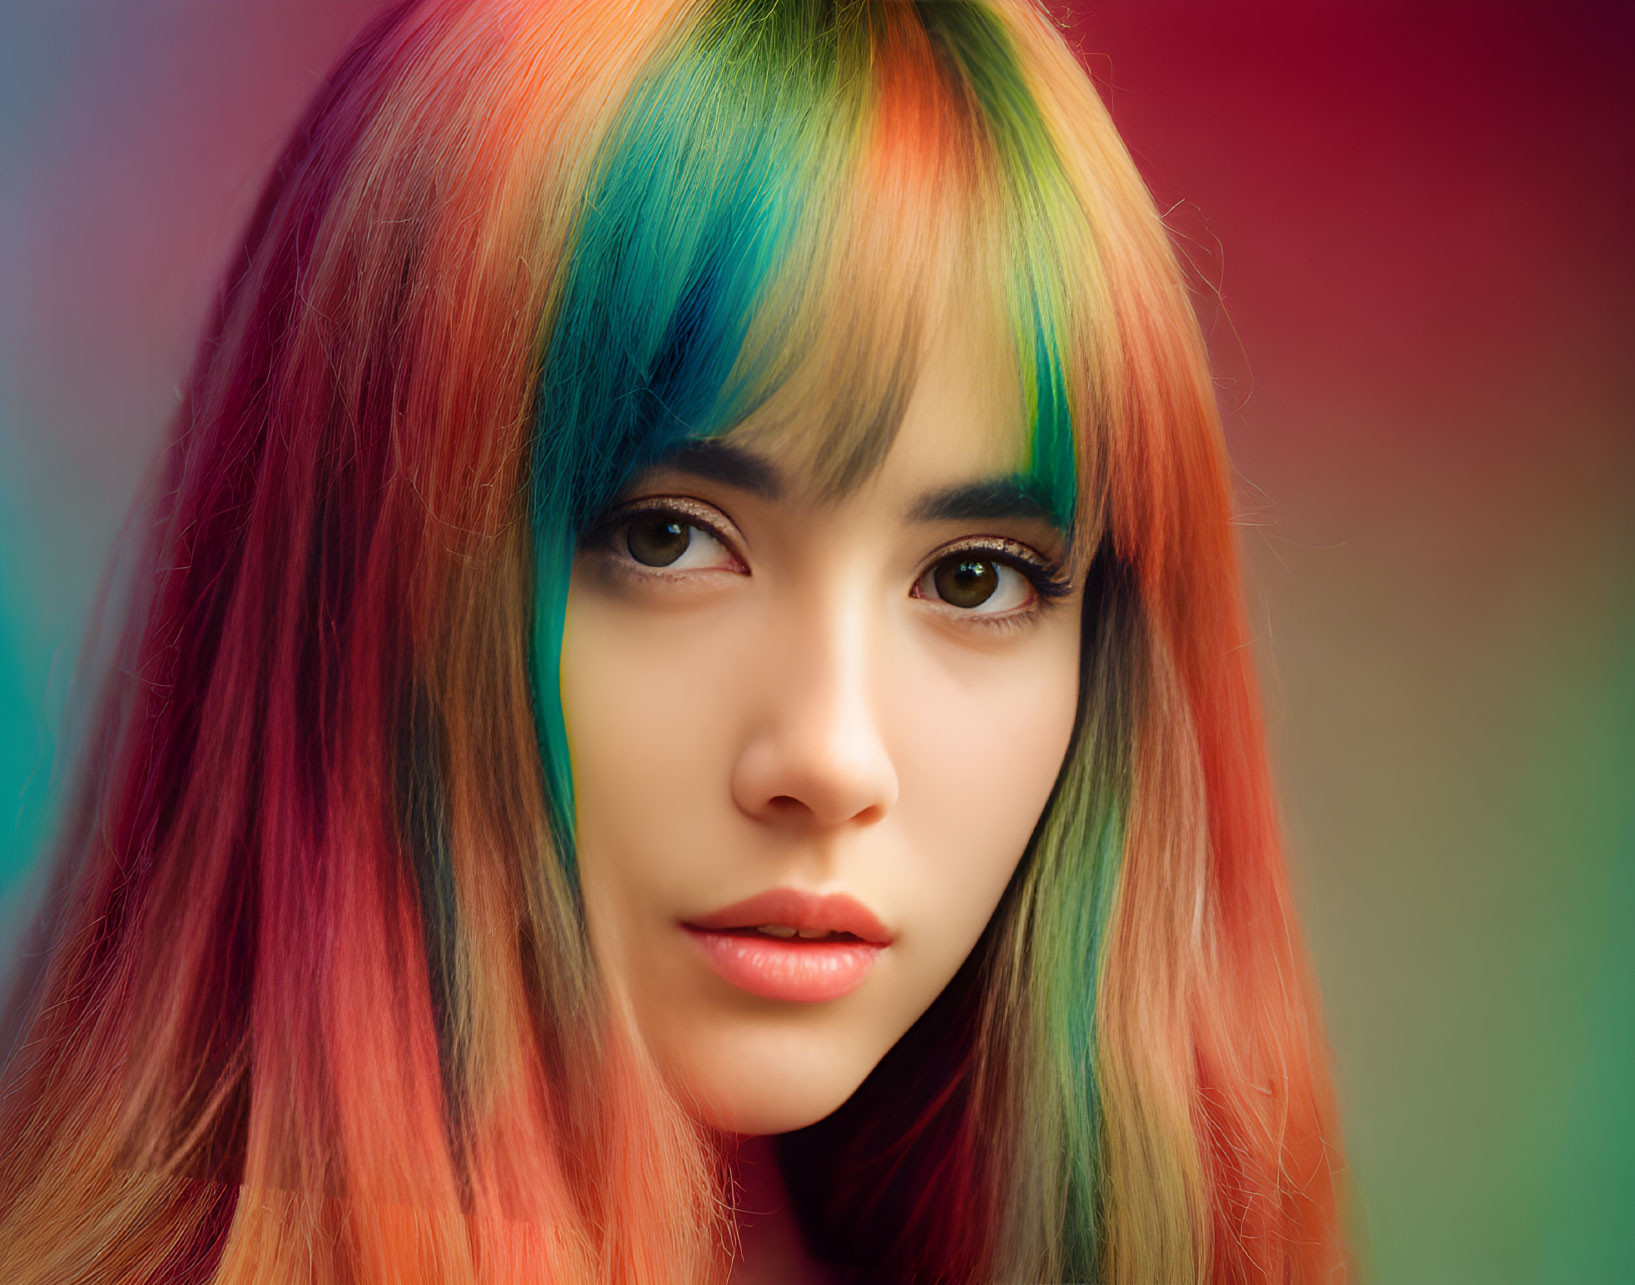 Colorful portrait of a person with rainbow hair and bangs on vibrant backdrop